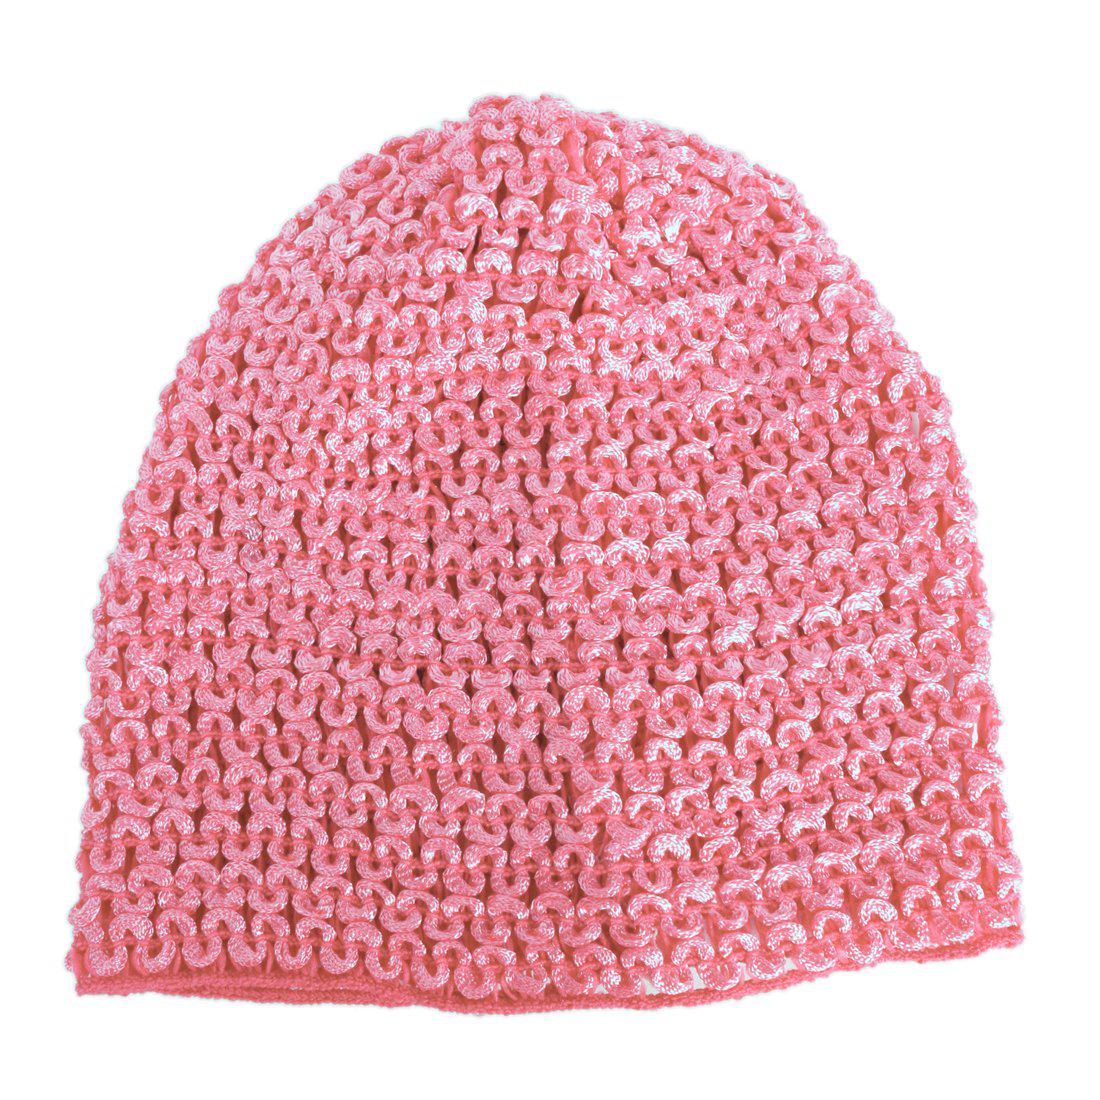 CROCHET SHIMMERY CAP WITH HEART CHARM